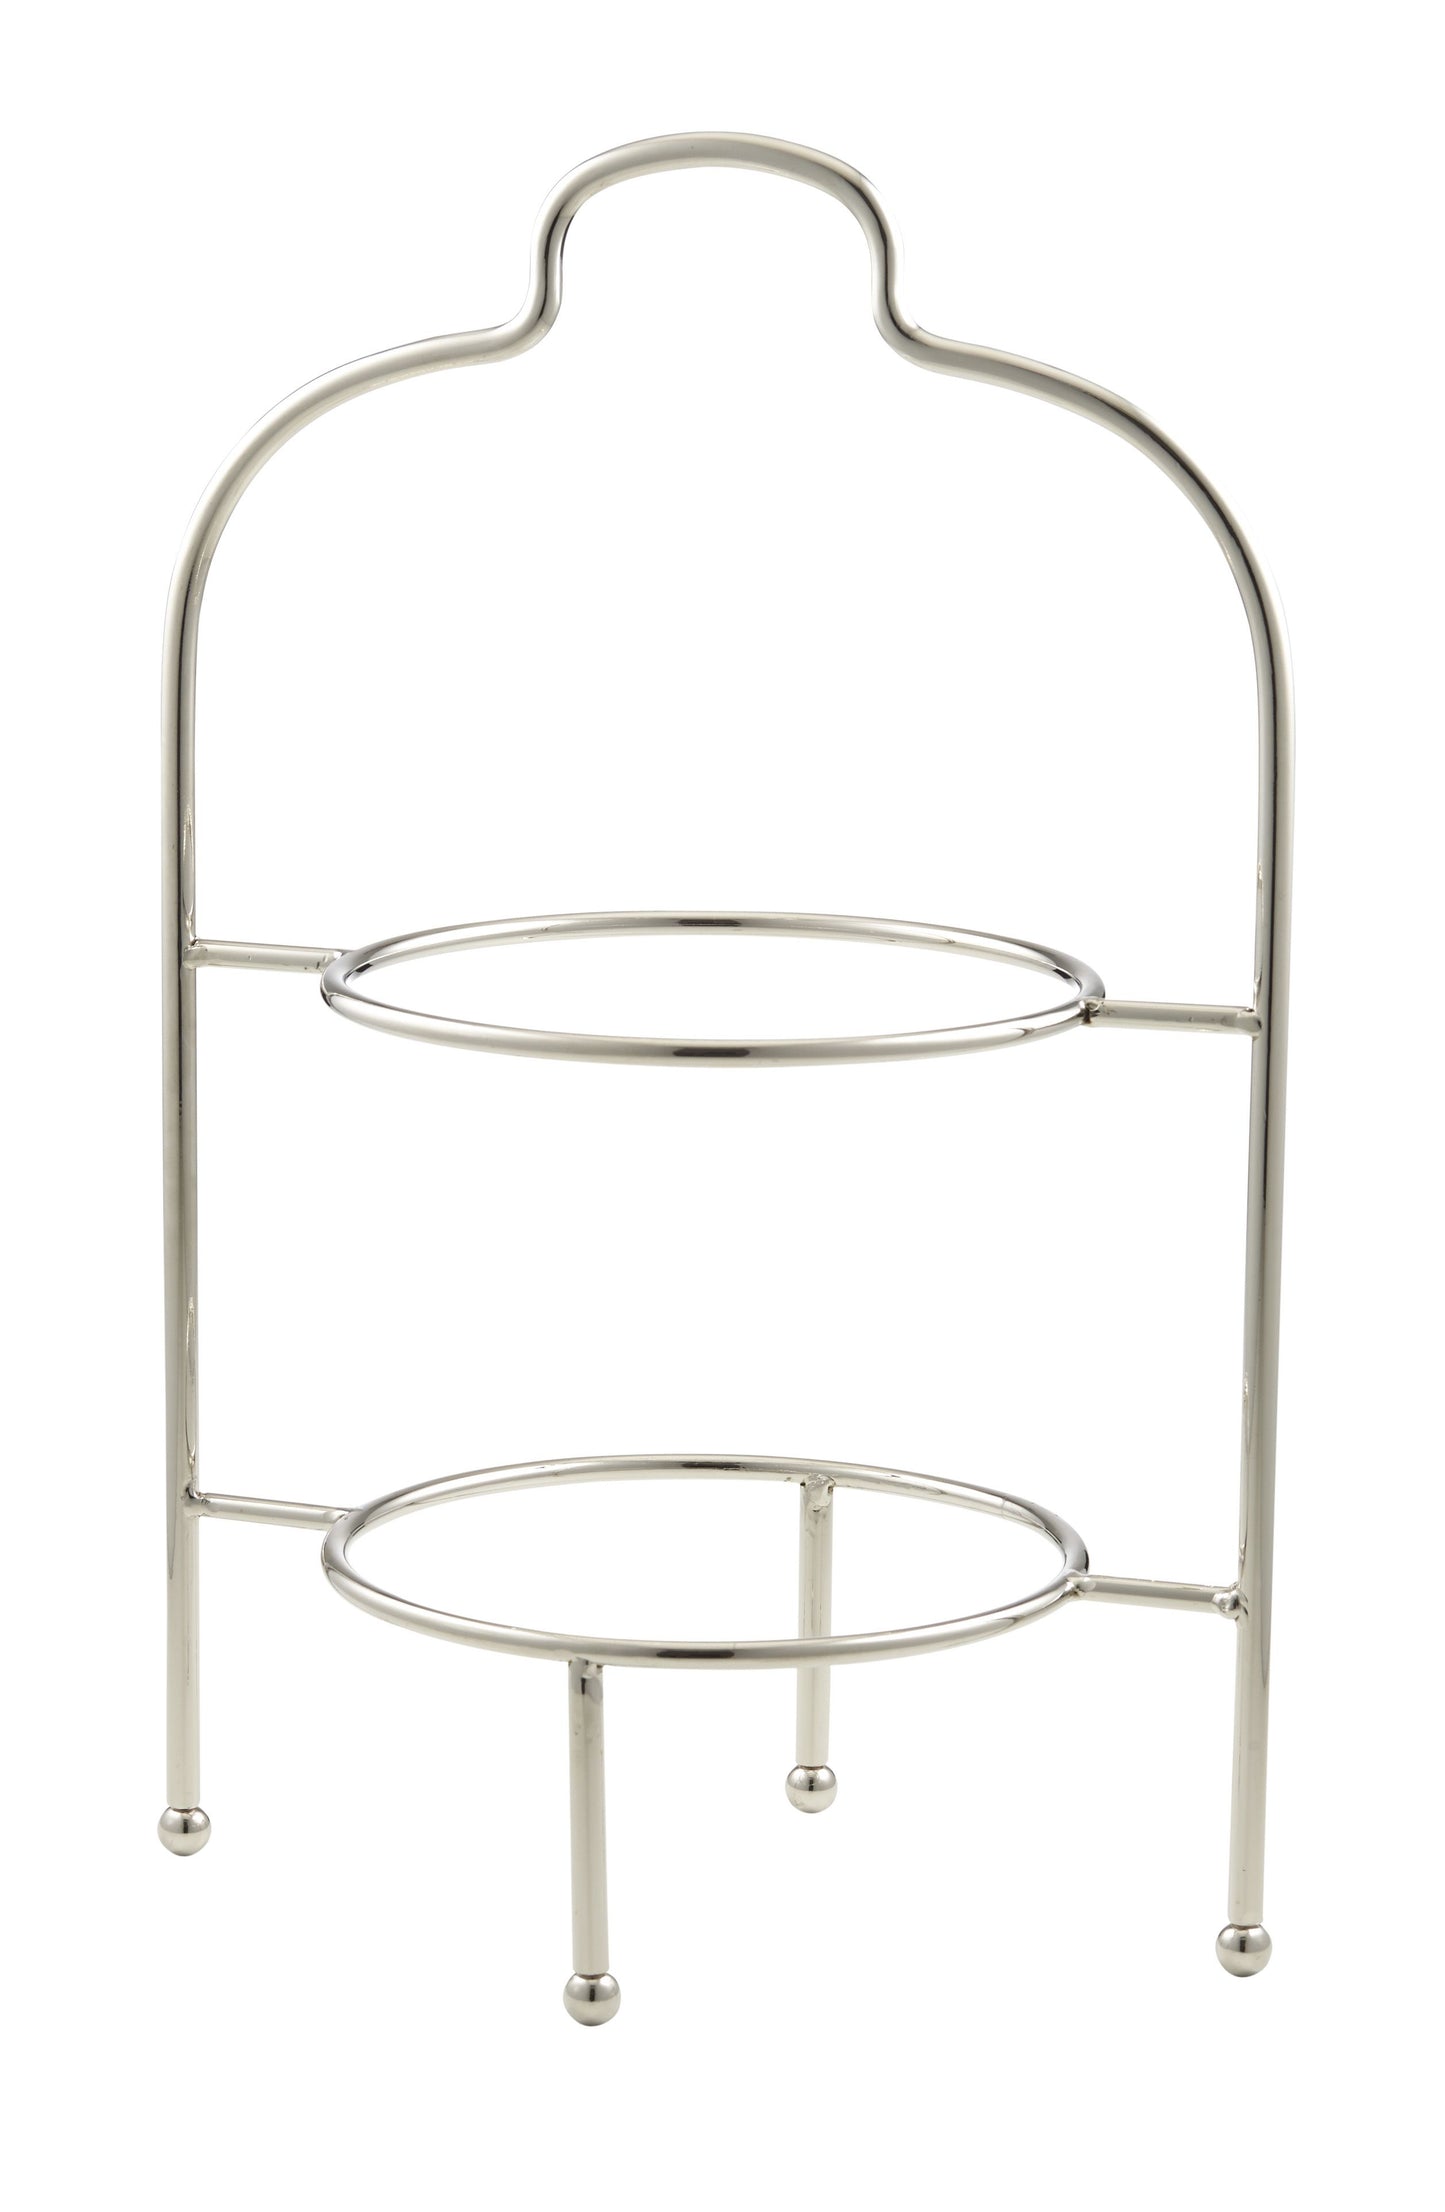 Davis and Waddell Bistro 2 Tier Plate Stand 50cm